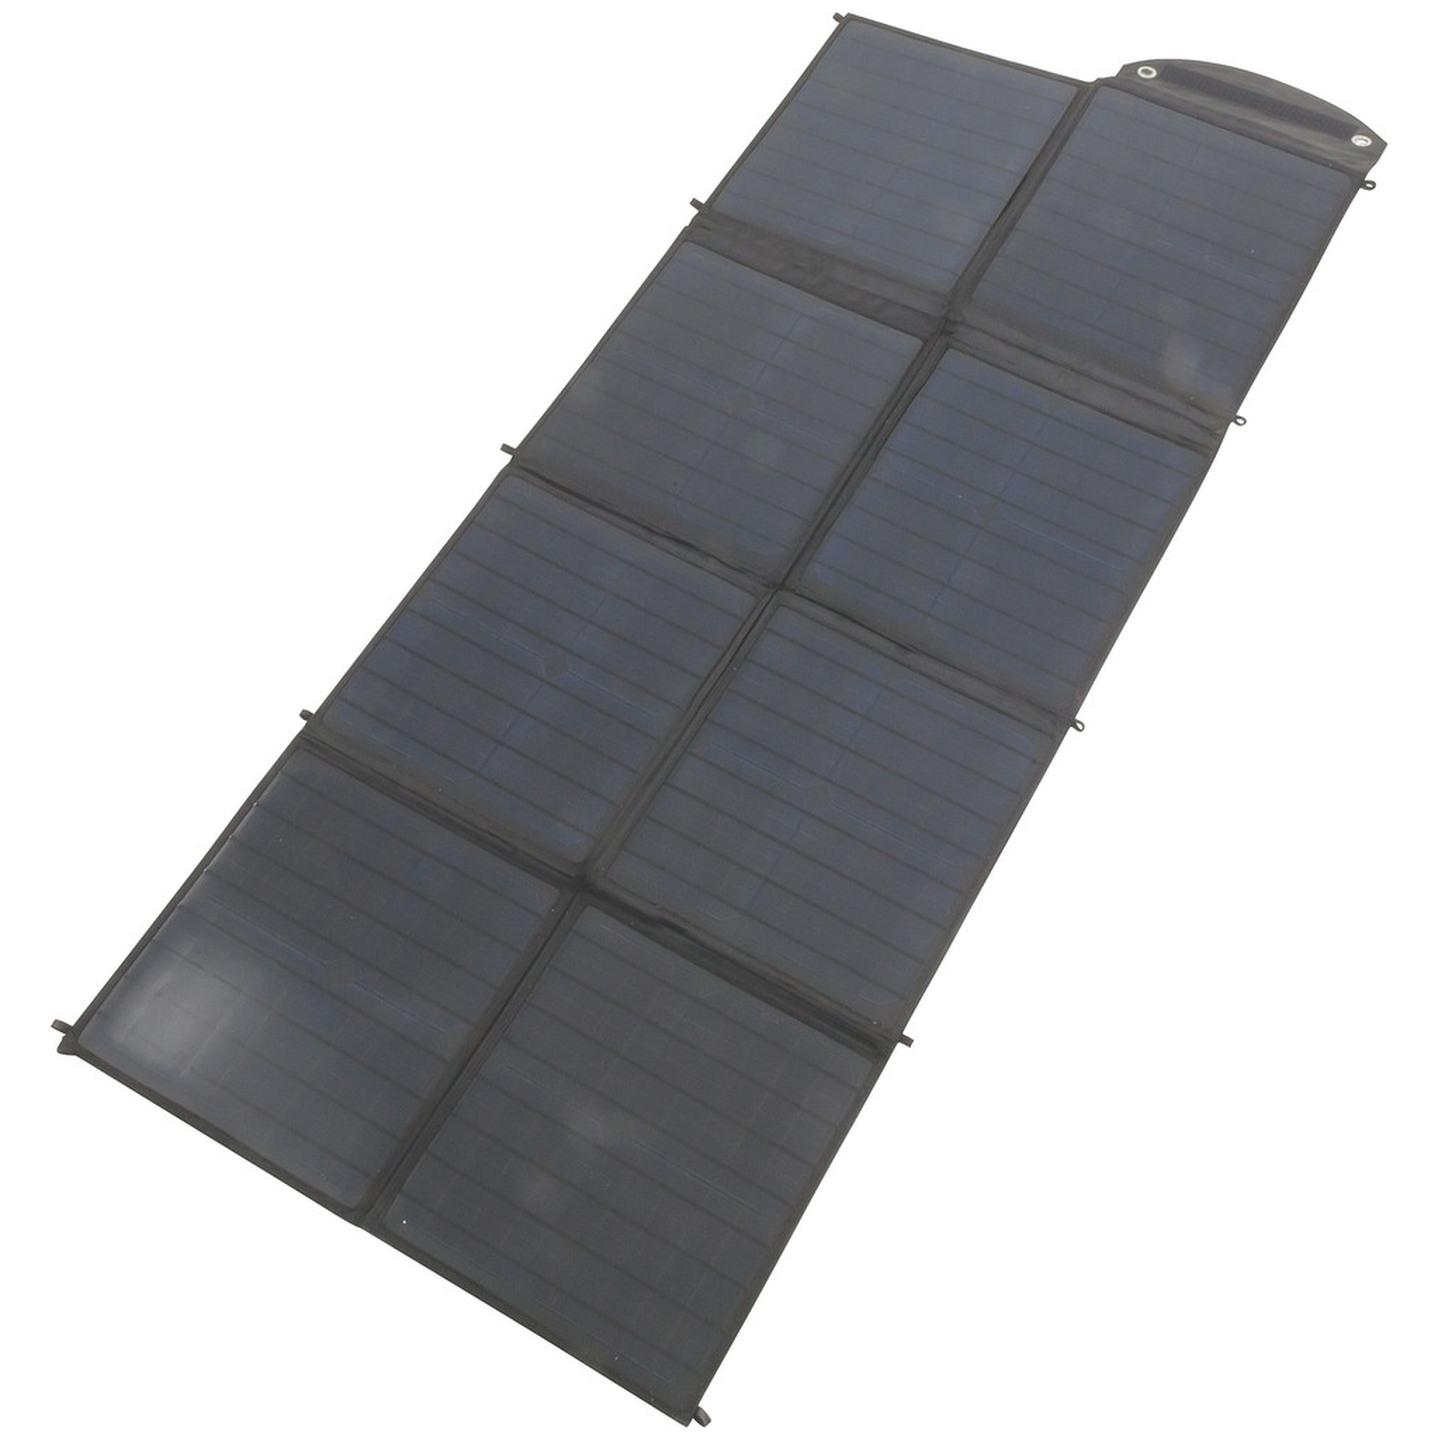 100W Solar Panel Array with Charge Controller & Carry Bag